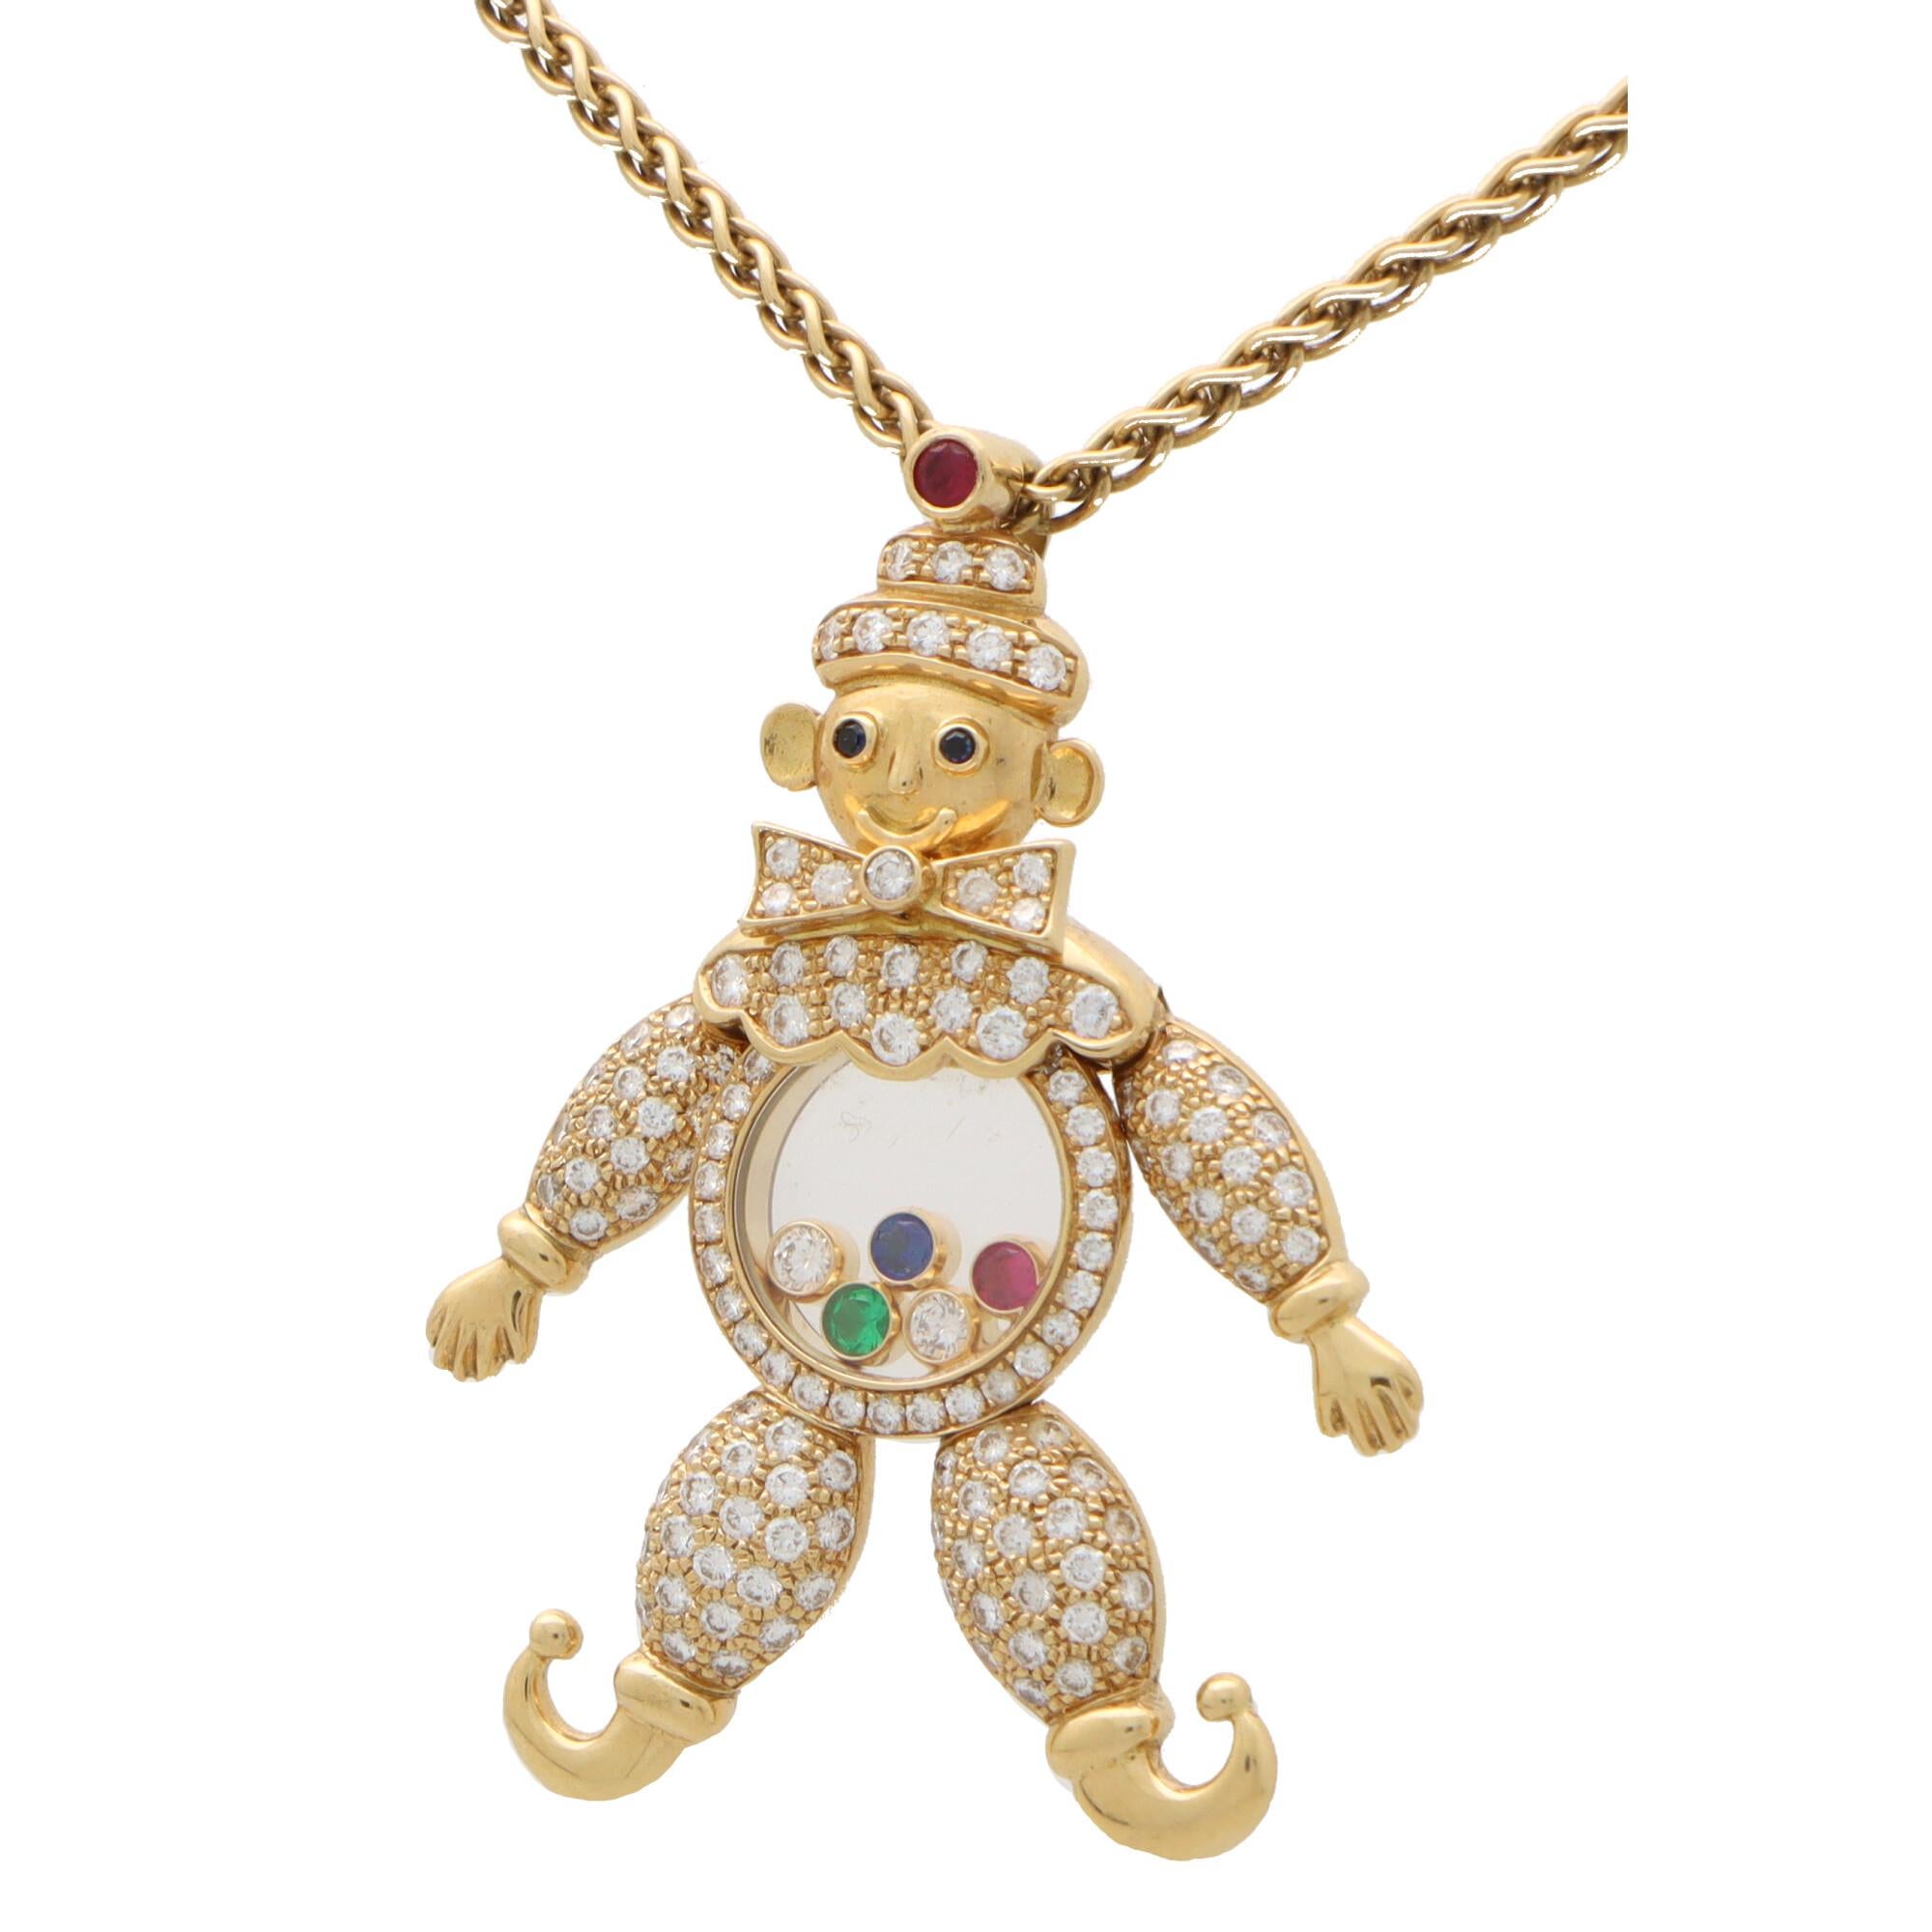 Round Cut Vintage Chopard 'Happy Clown' Pendant Necklace with Diamonds in 18k Yellow Gold